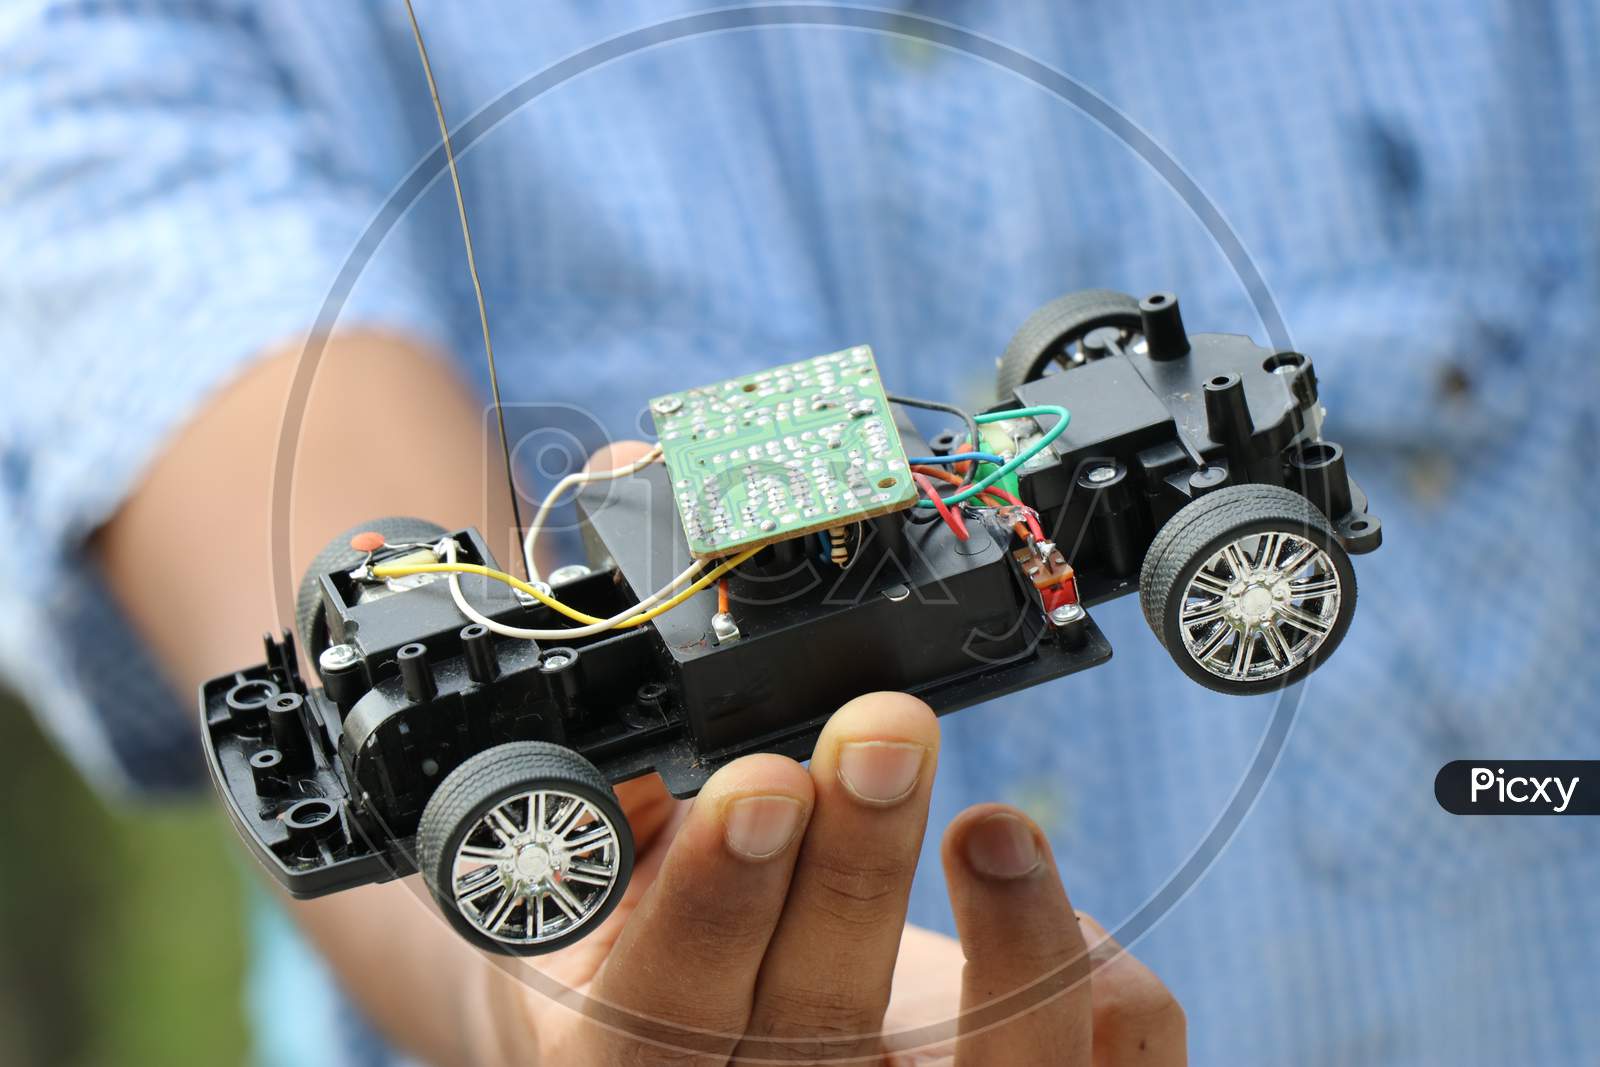 Inside View Of Toy Remote Control Car Also Called As Radio Controlled Car